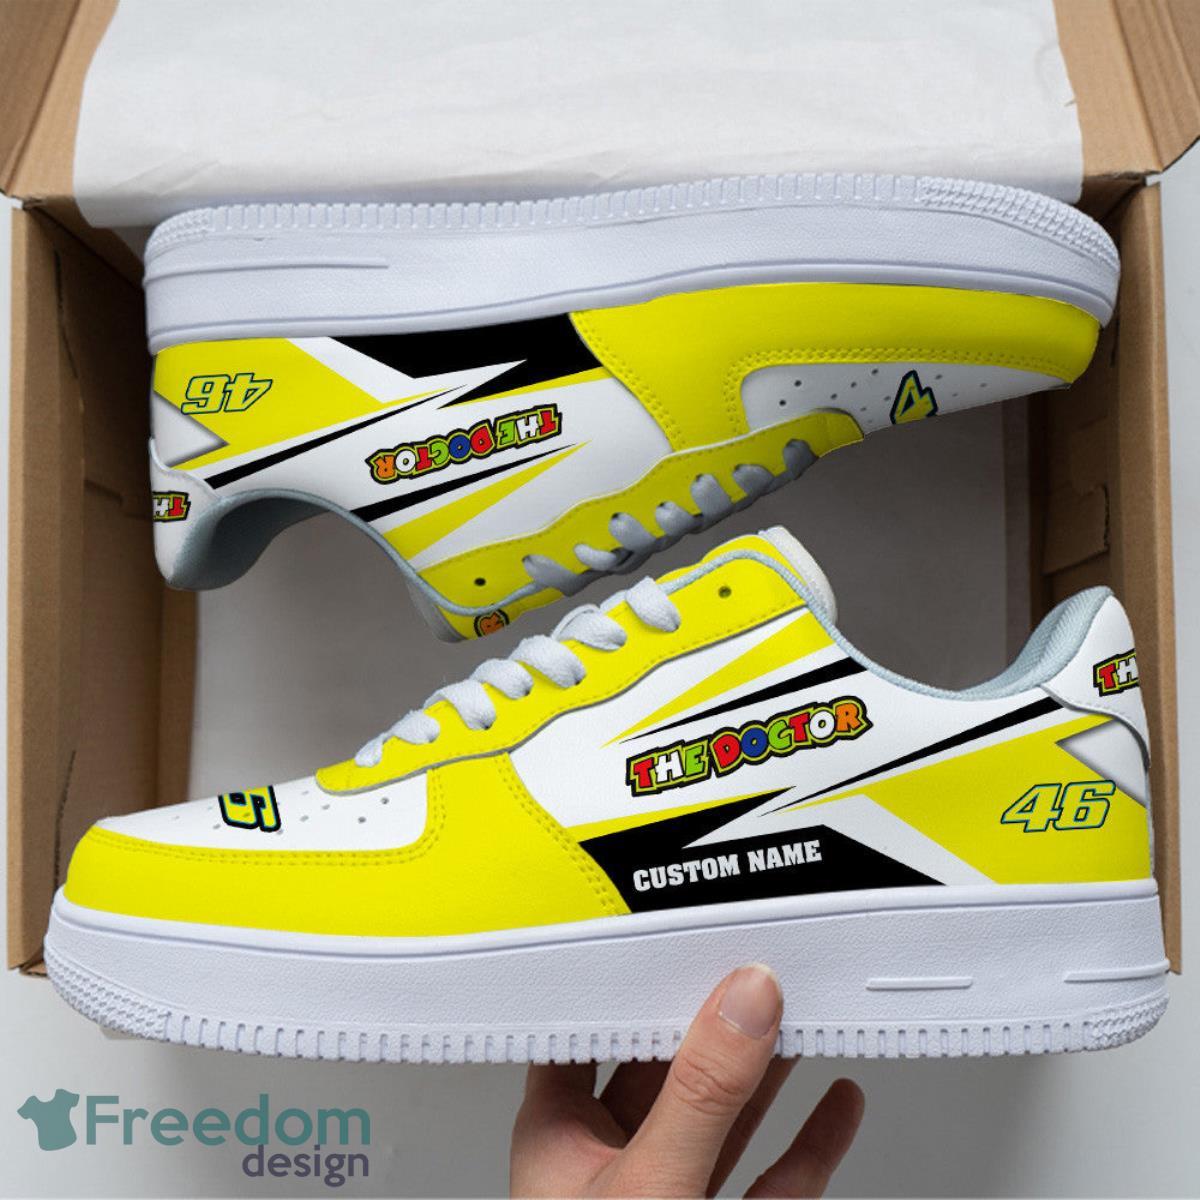 46 The Doctor Valentino Rossi Custom Name Air Force Shoes Sport Sneakers For Men Women Product Photo 1